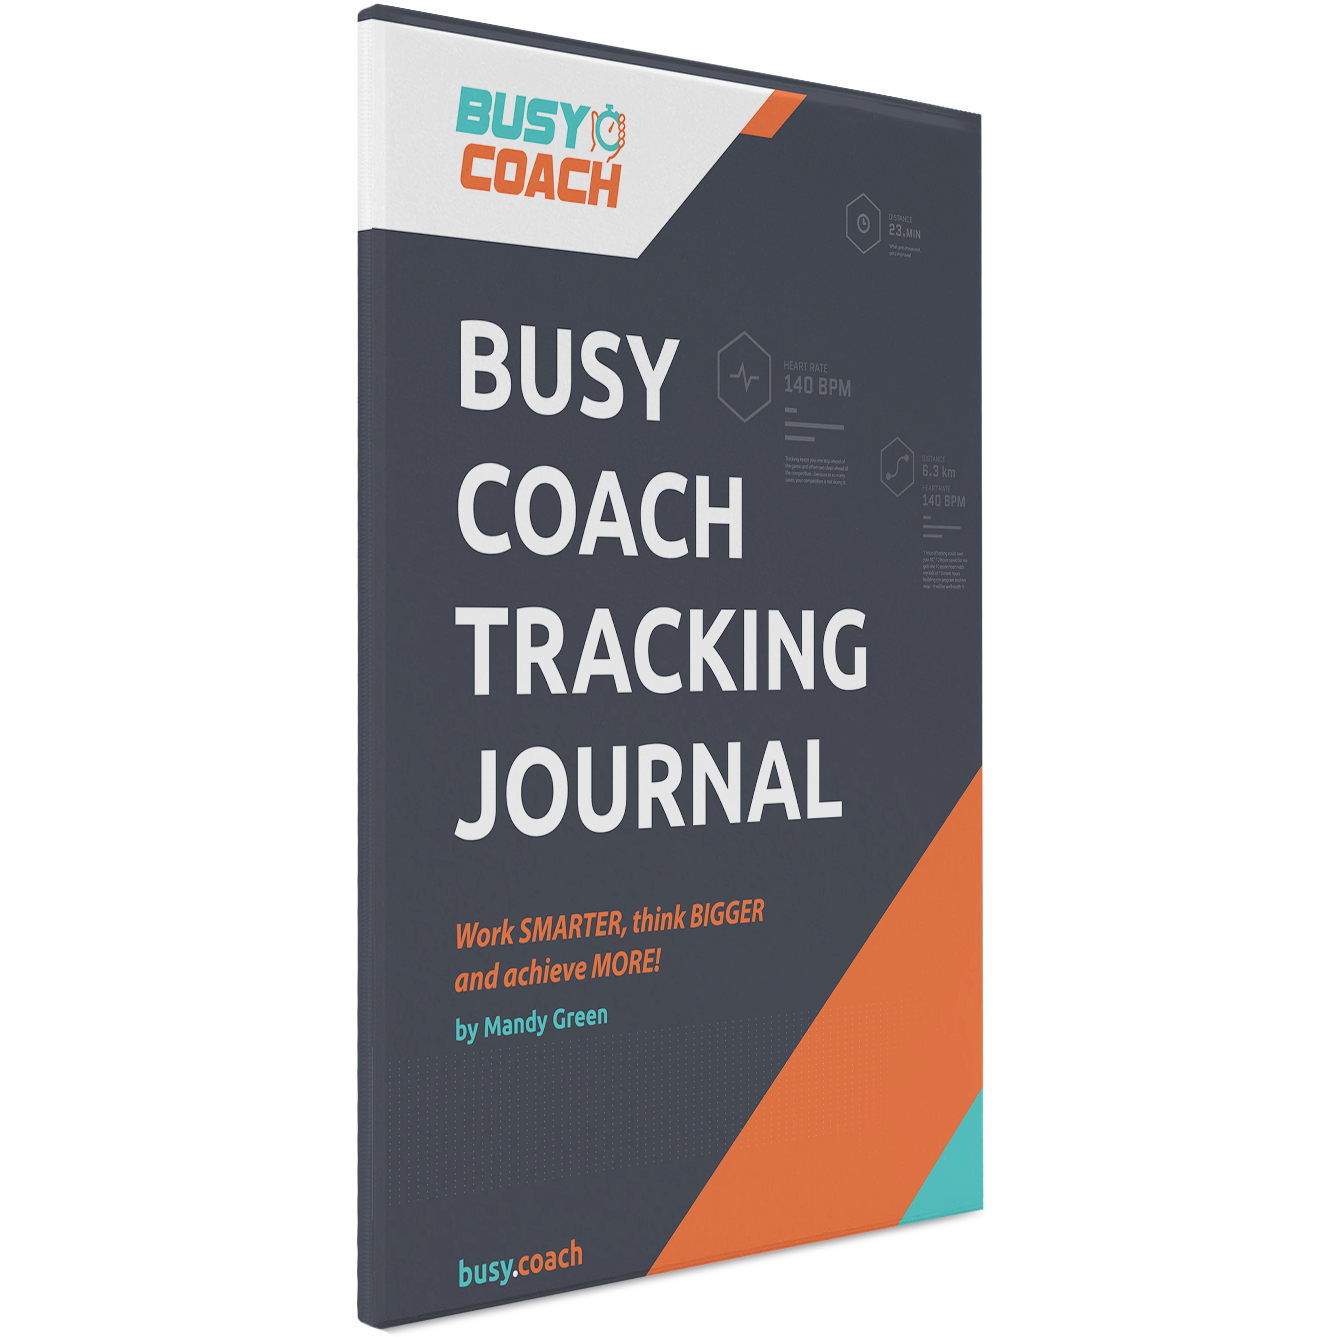 Busy Coach Tracking Journal